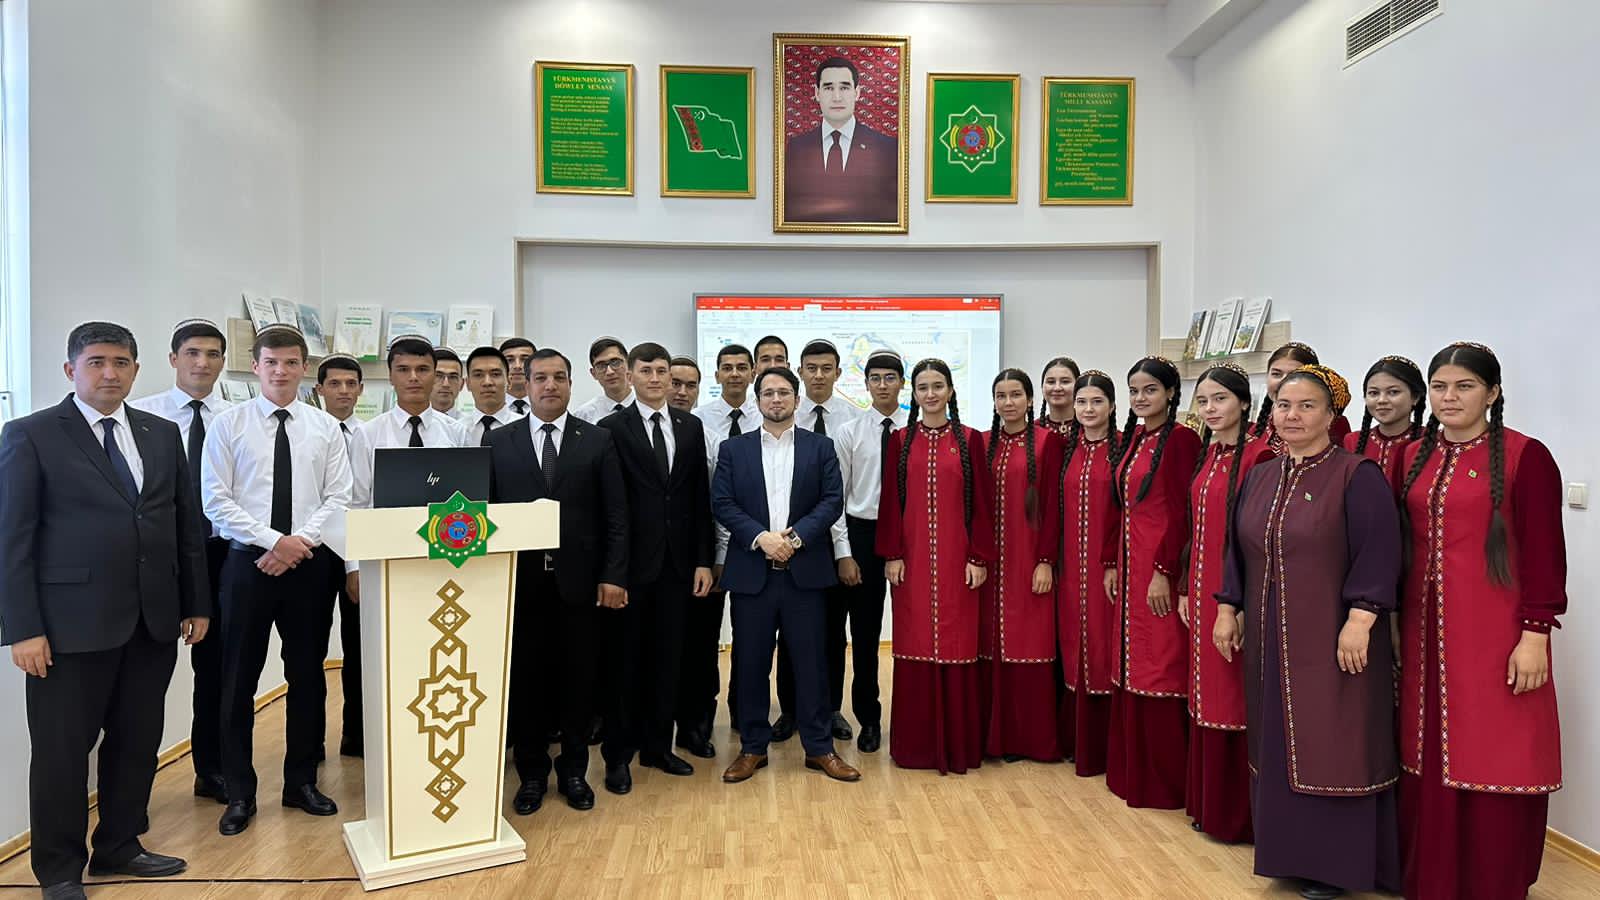 USAID and the State Department co-organized a series of lectures and trainings on water efficiency and desalinization in Turkmenistan